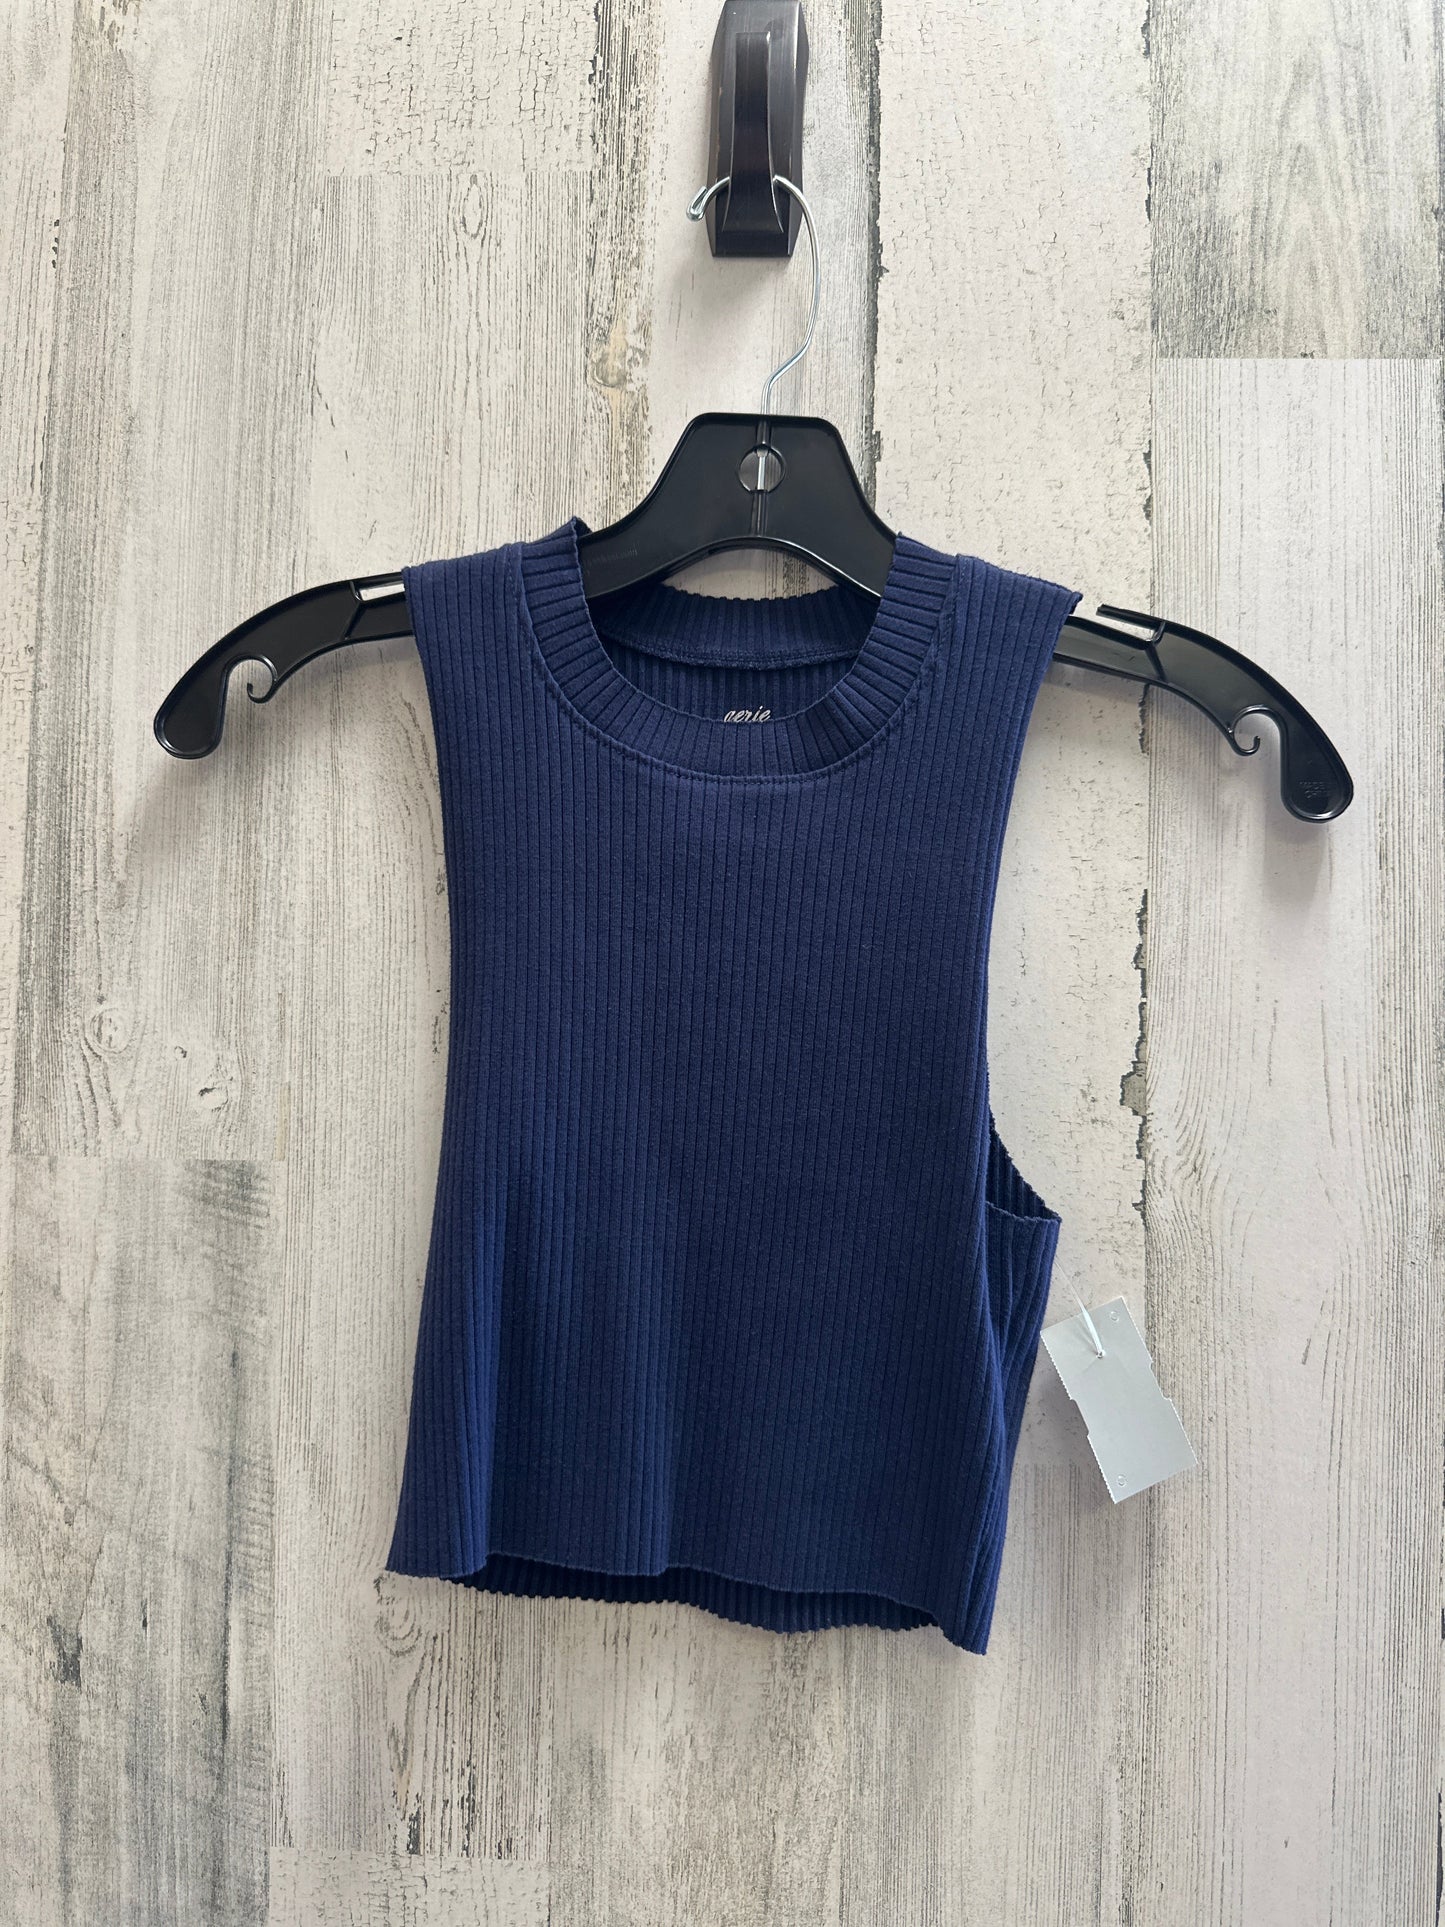 Blue Top Sleeveless Aerie, Size Xs